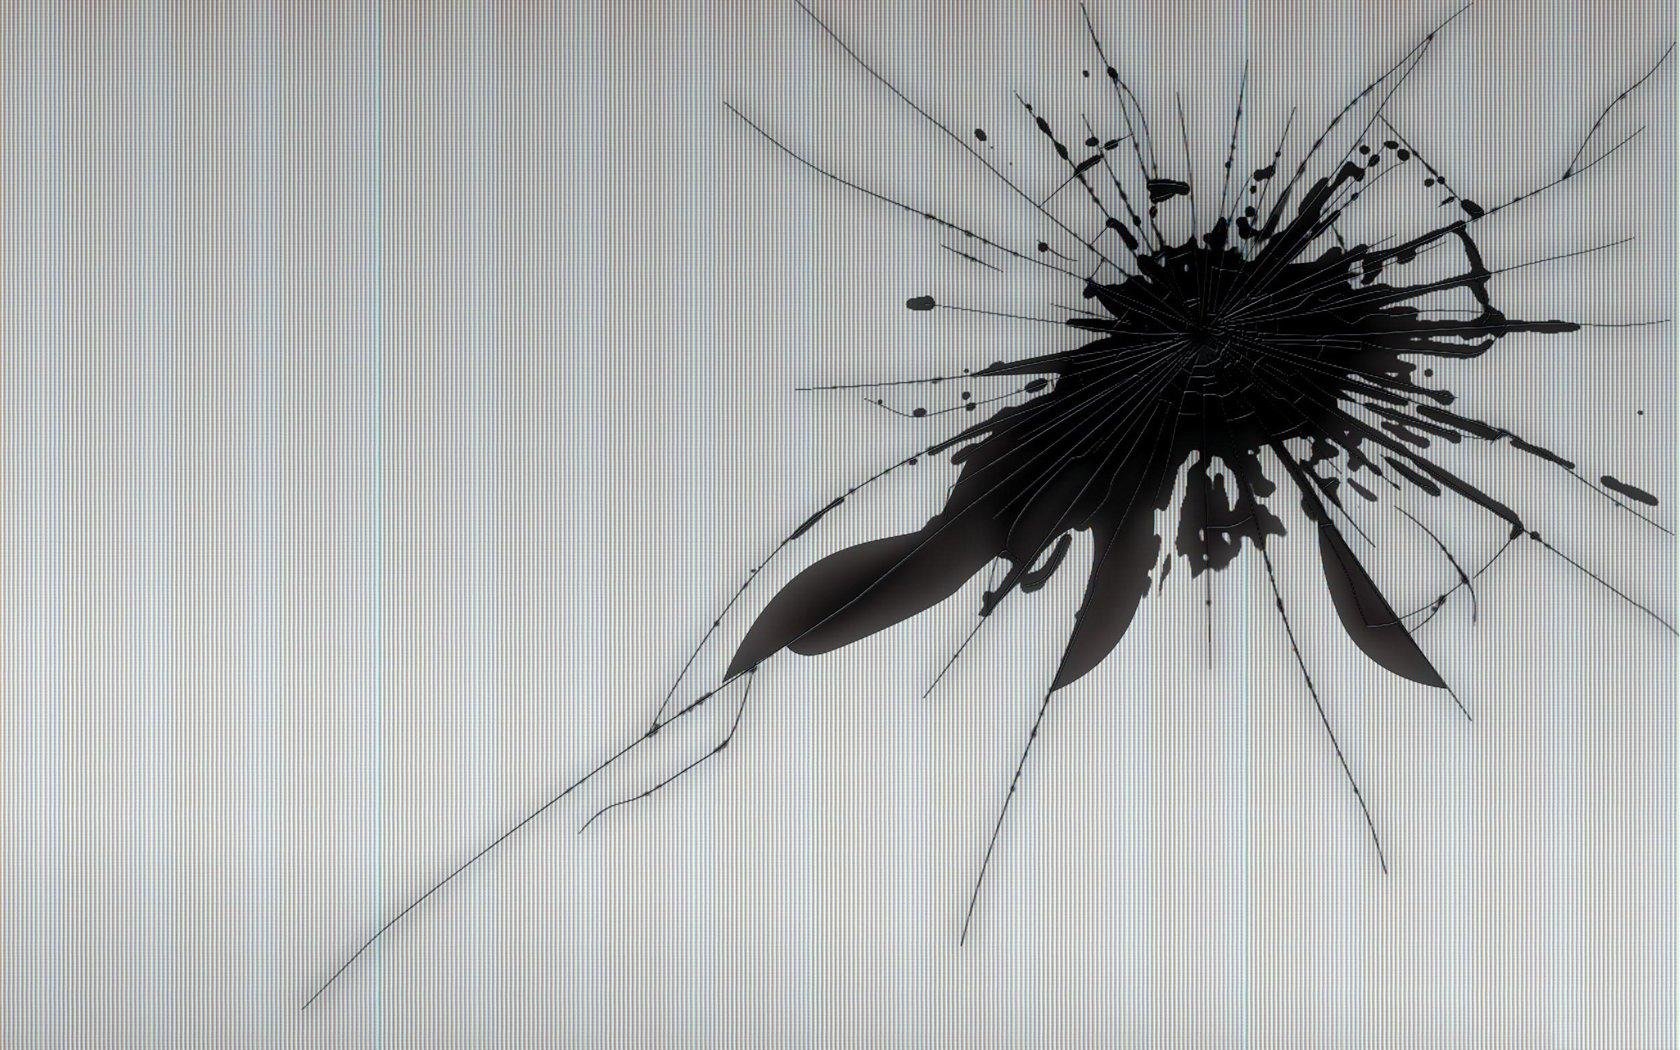 Awesome Cracked Screen (Broken) free wallpaper ID:300618 for hd 1680x1050 desktop